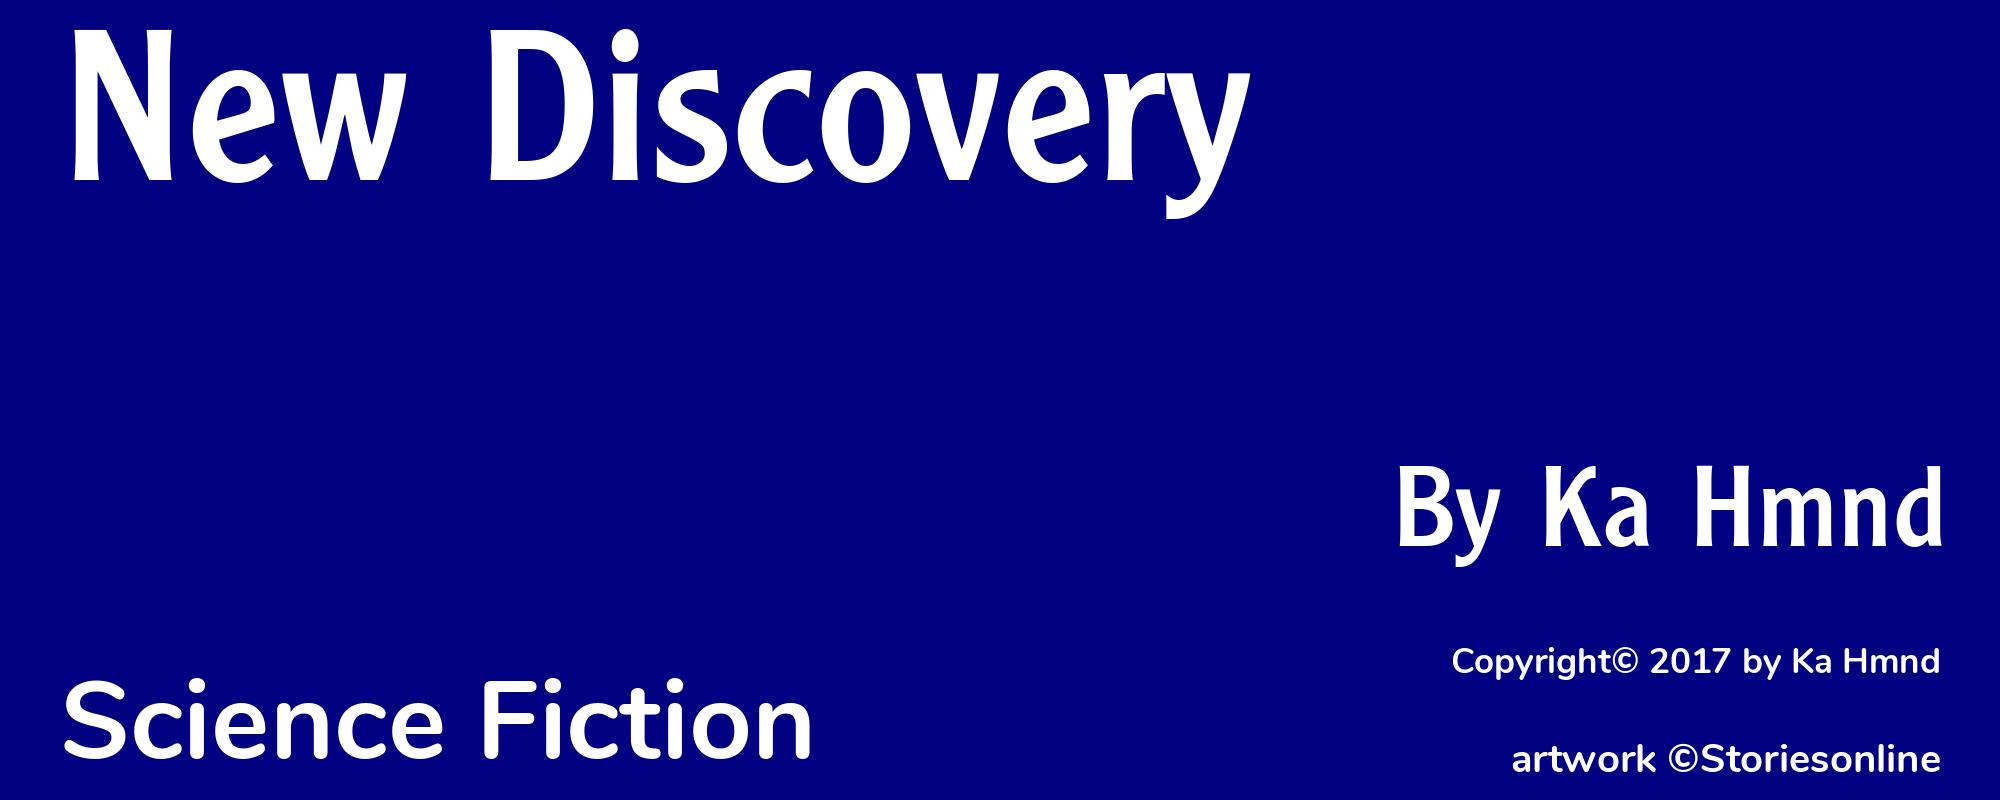 New Discovery - Cover